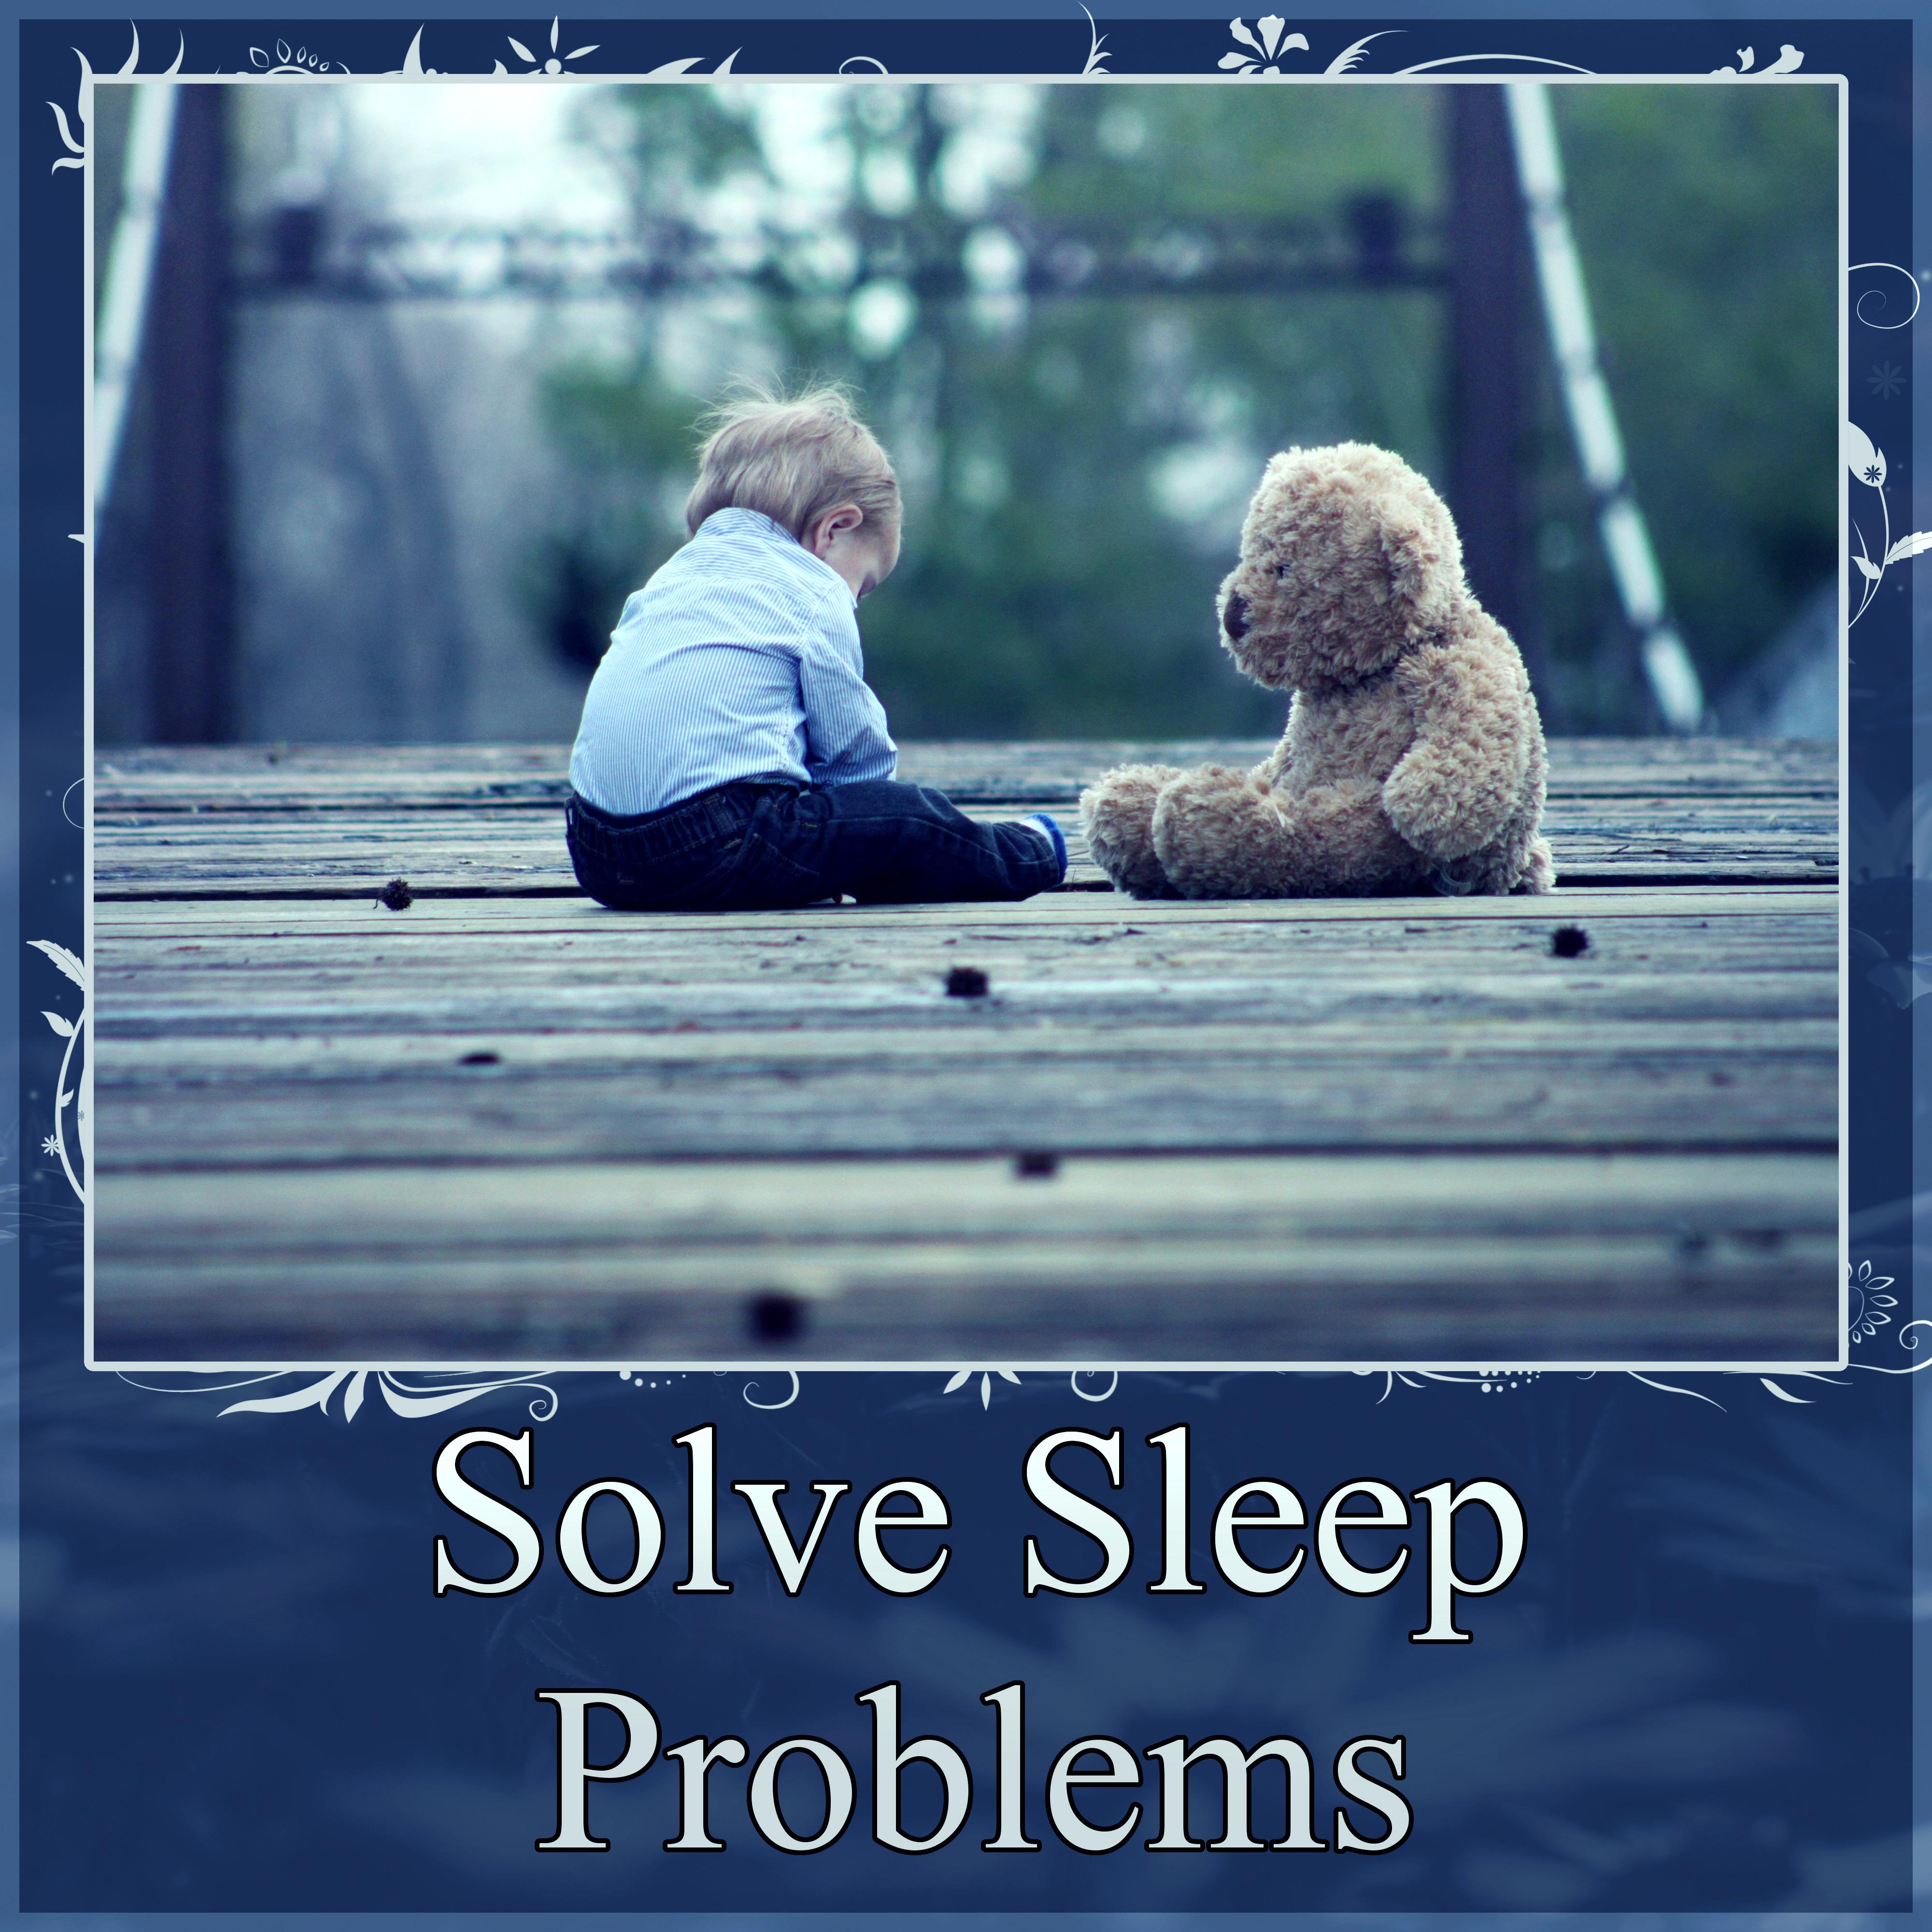 Solve Sleep Problems - White Noise to Calm Down, Stop Crying Baby, Bedtime Music, Nature Sounds